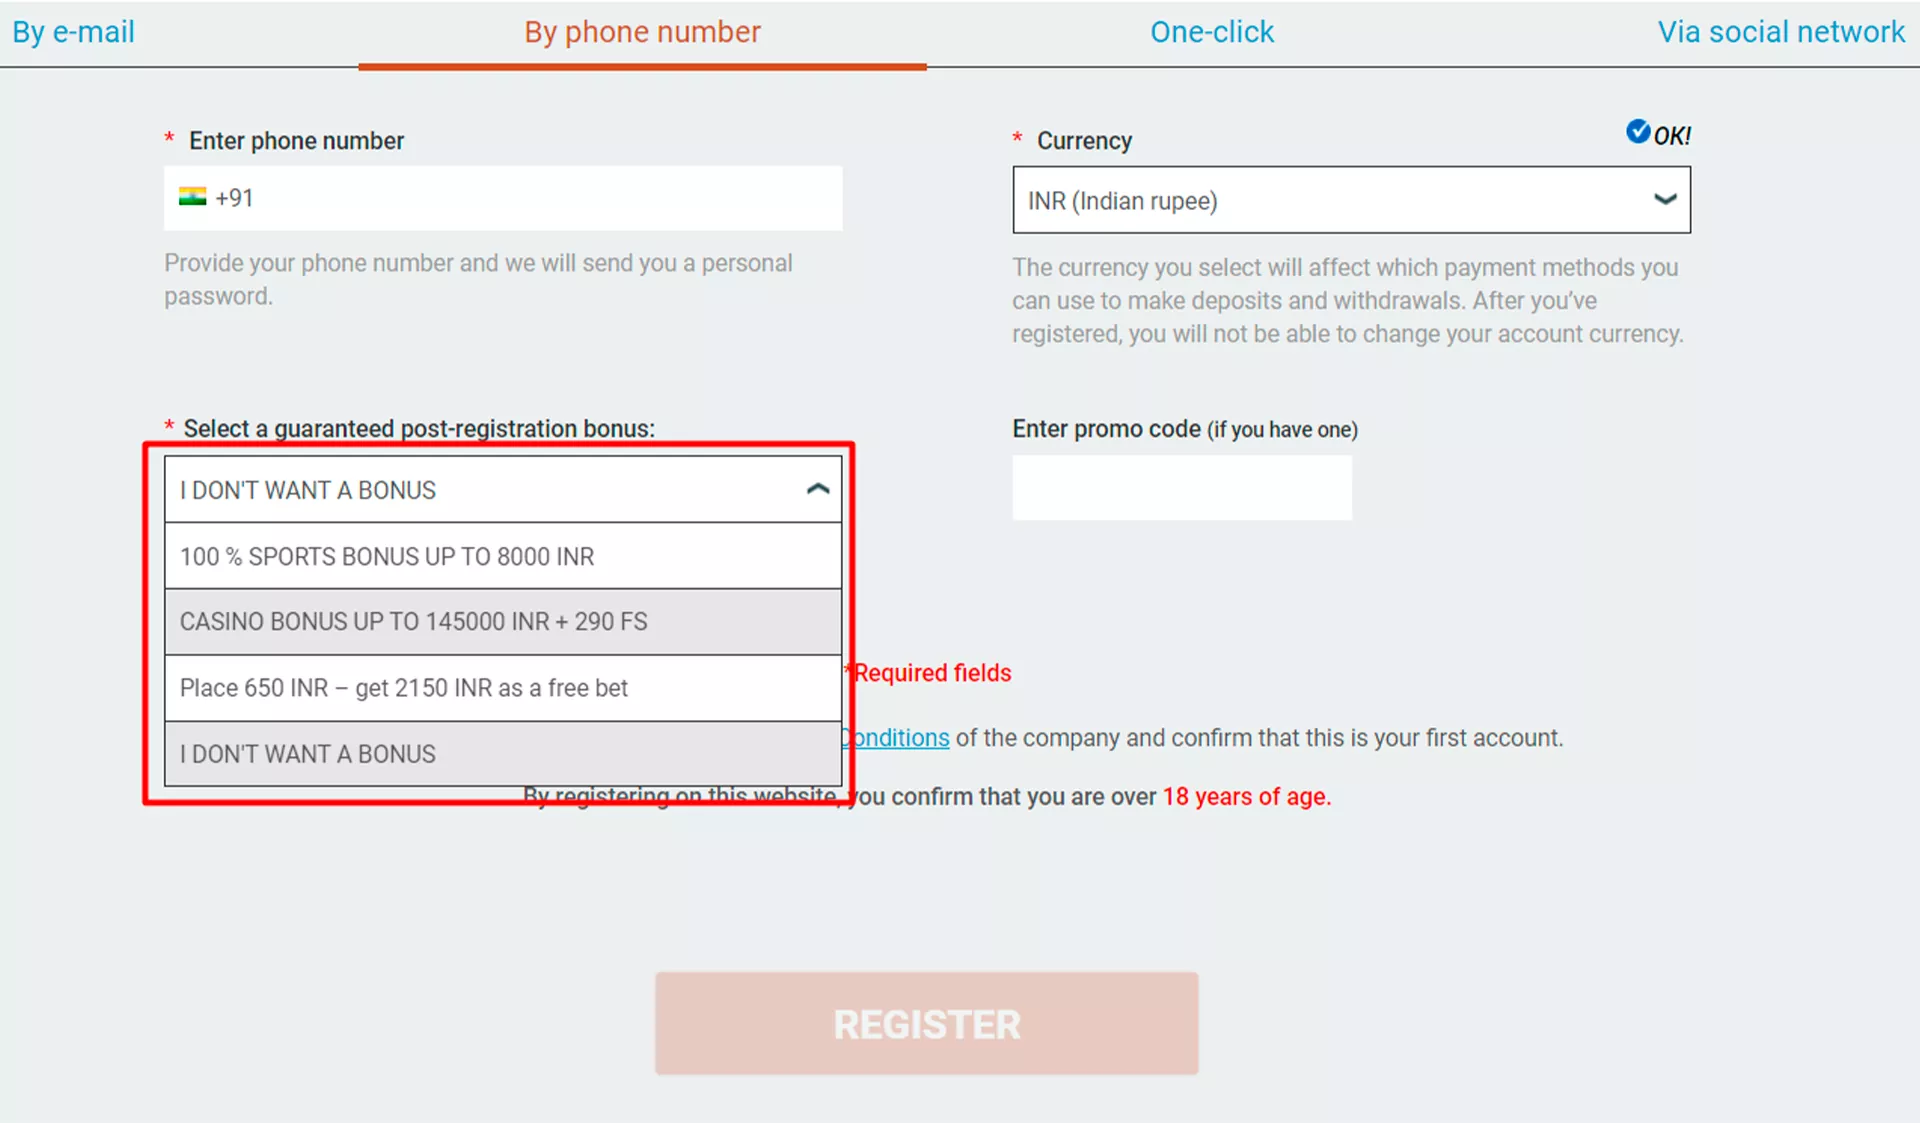 You can register without choosing a bonus and make a decision later.